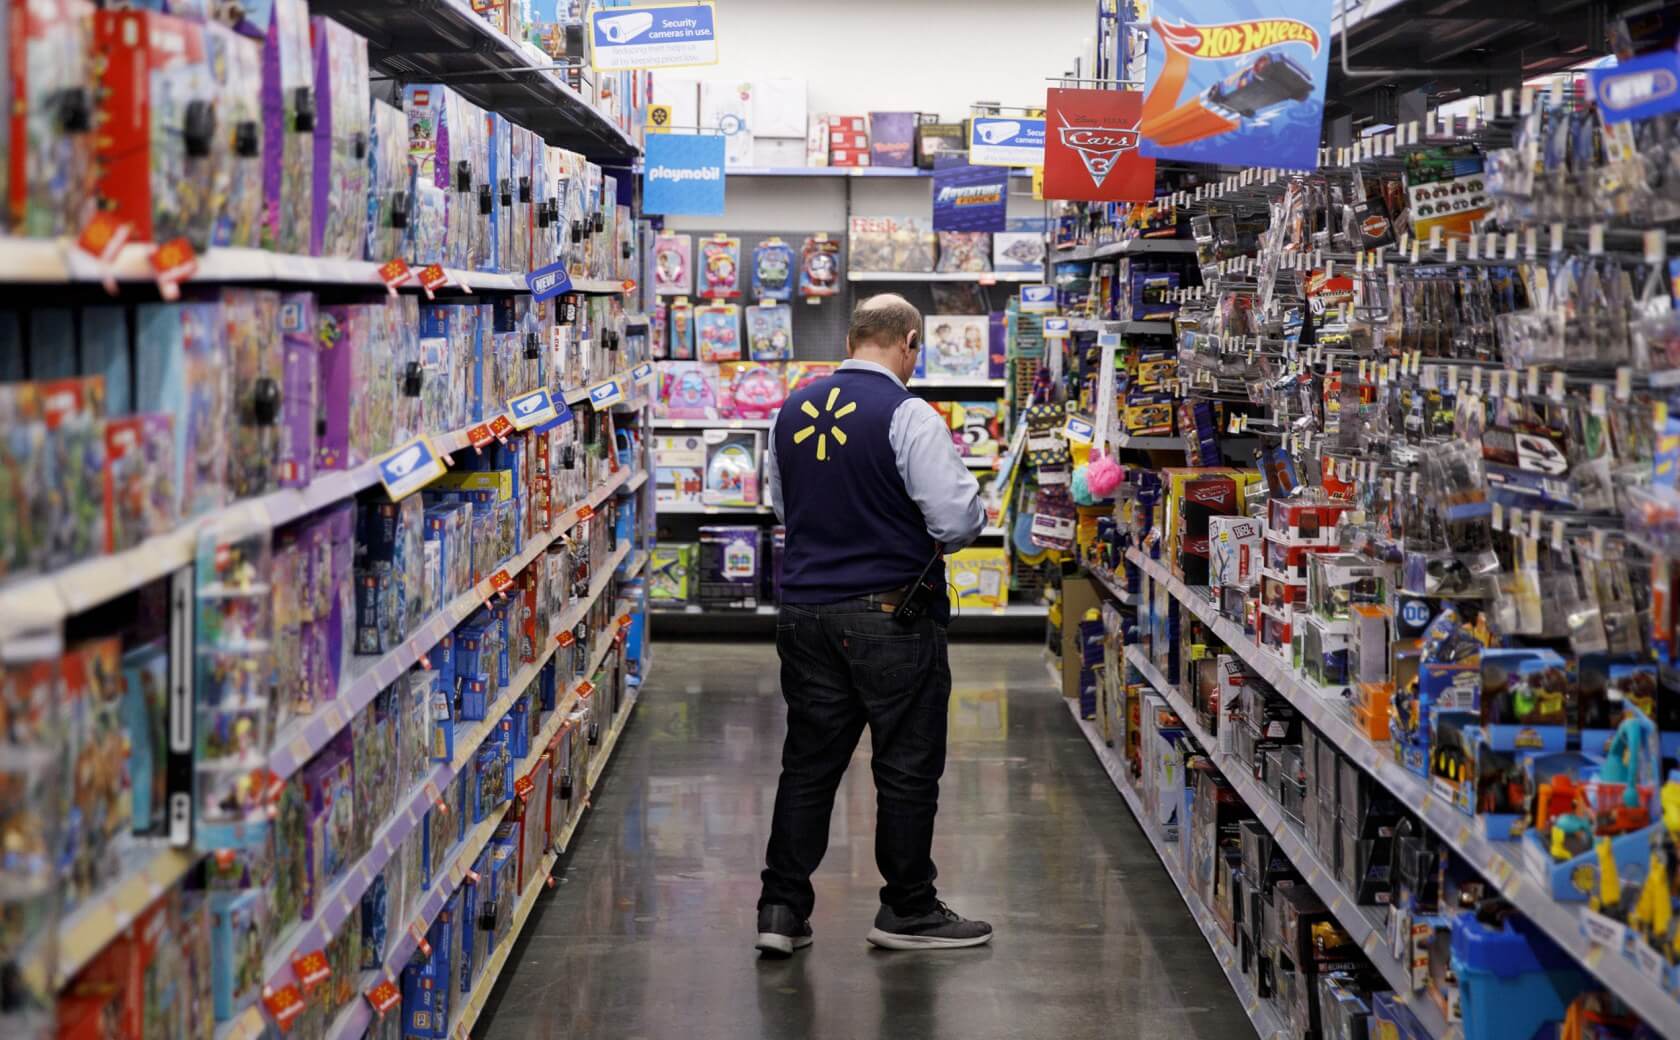 Walmart tells staff to remove signs showing violence, including video game ads